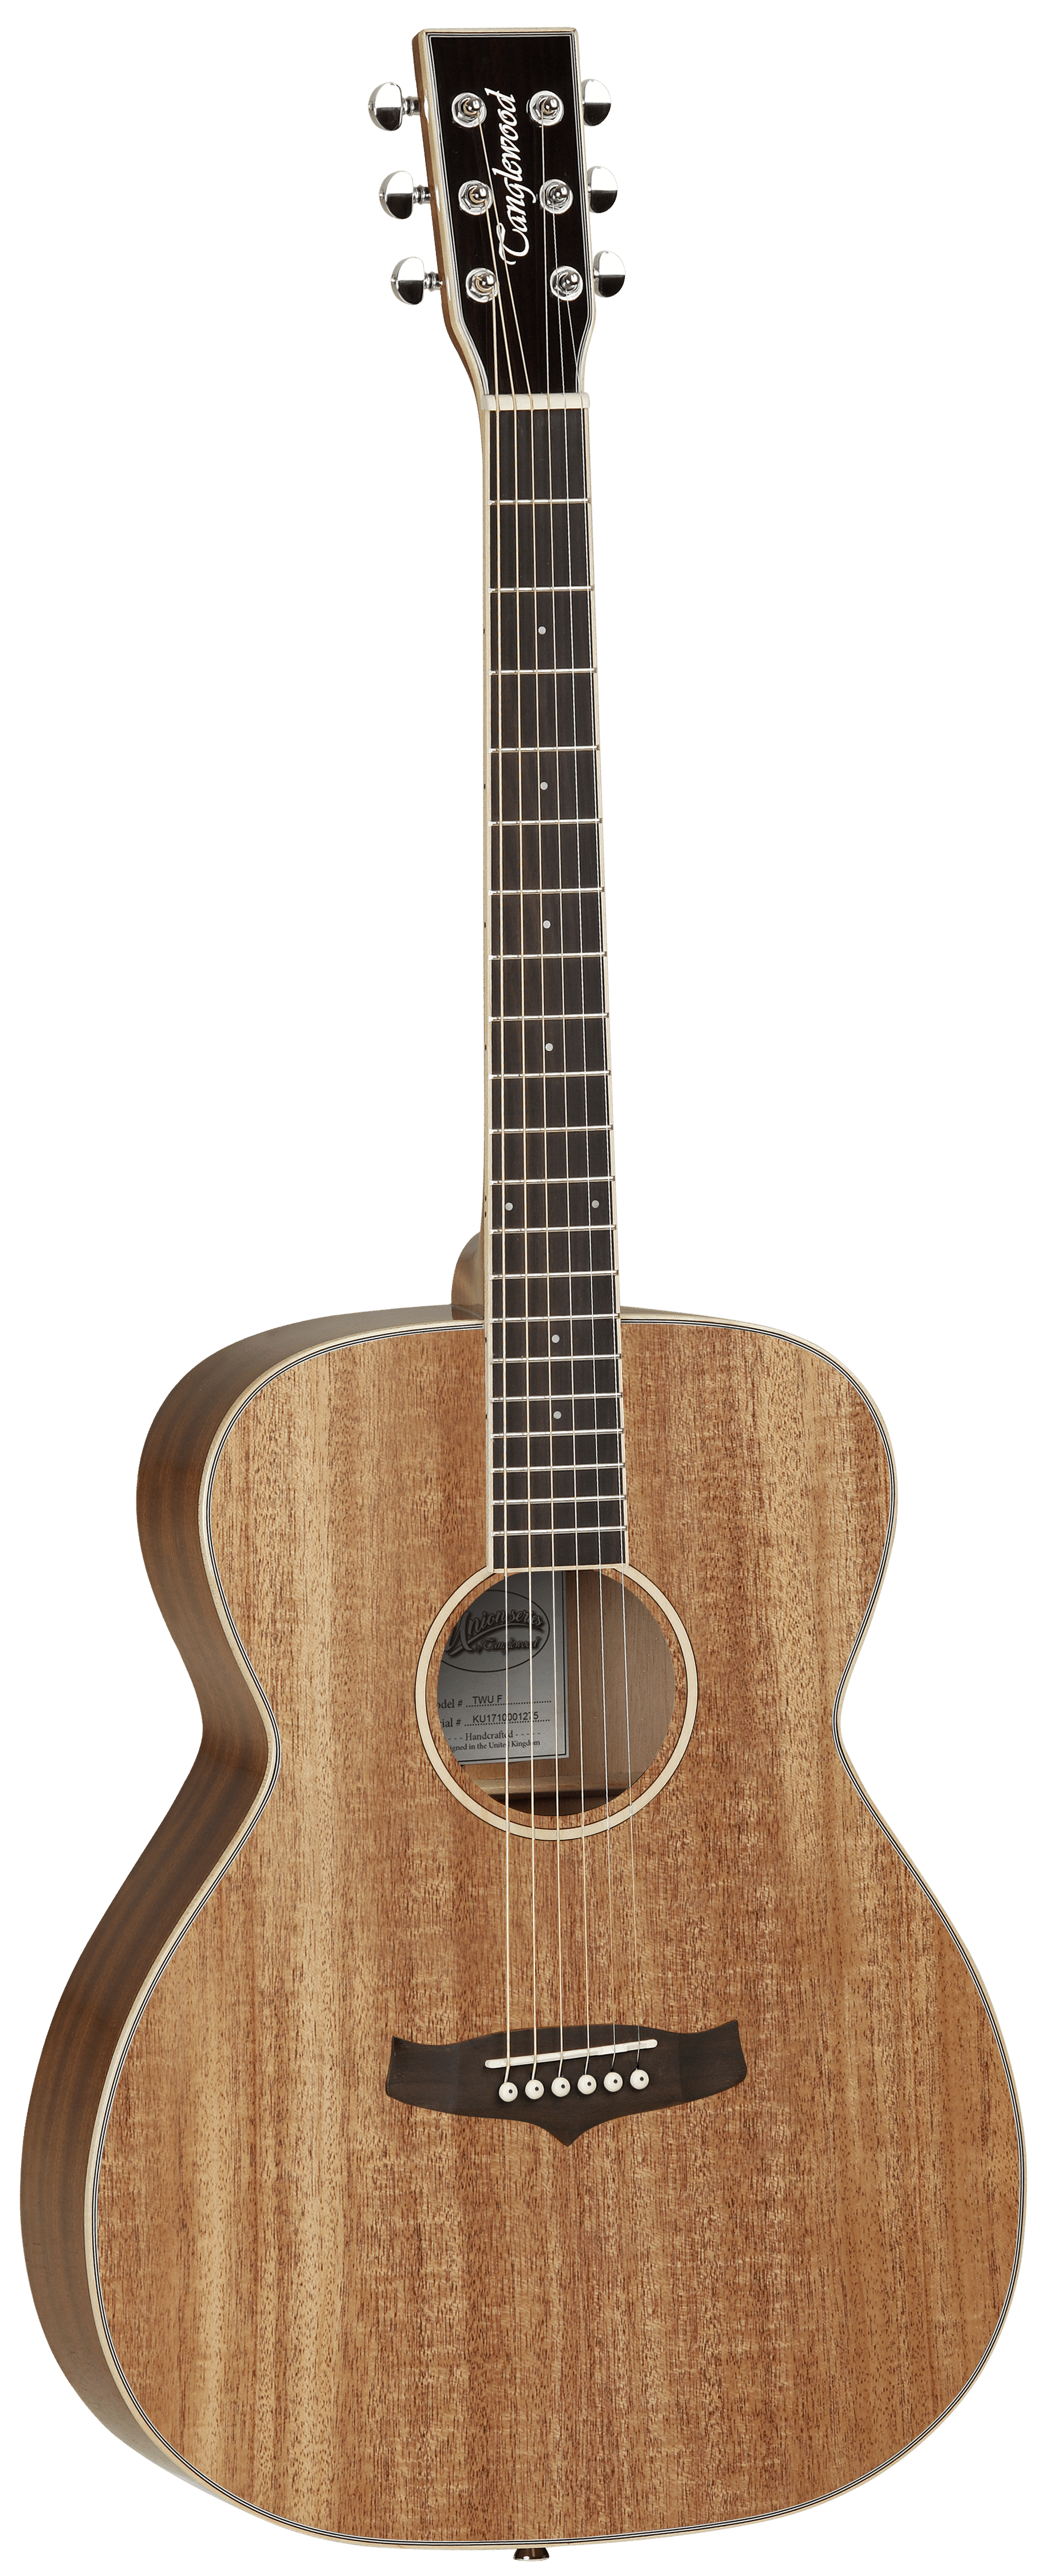 Tanglewood Guitars Introduces New Guitar Line for 2018